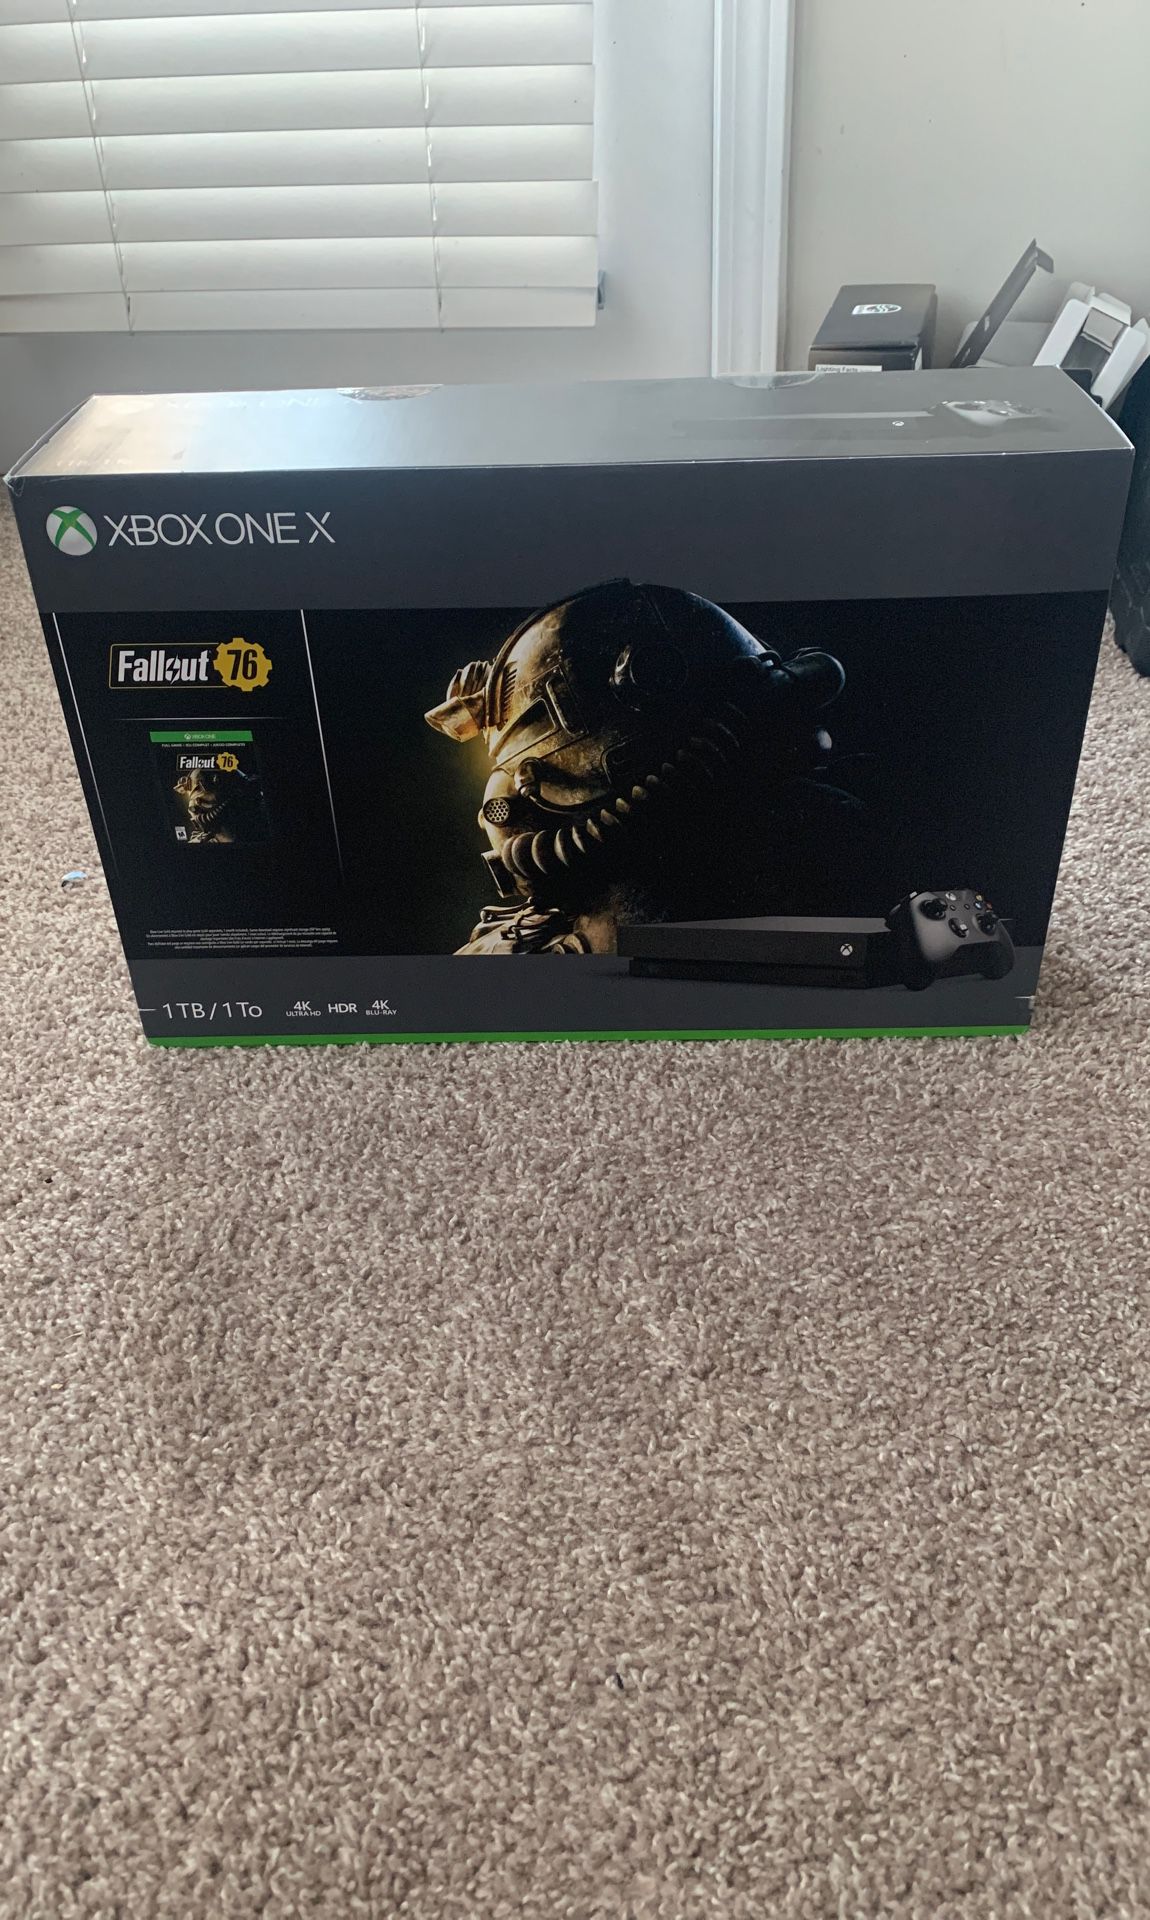 New Sealed XBOX One X Fallout 76 Edition